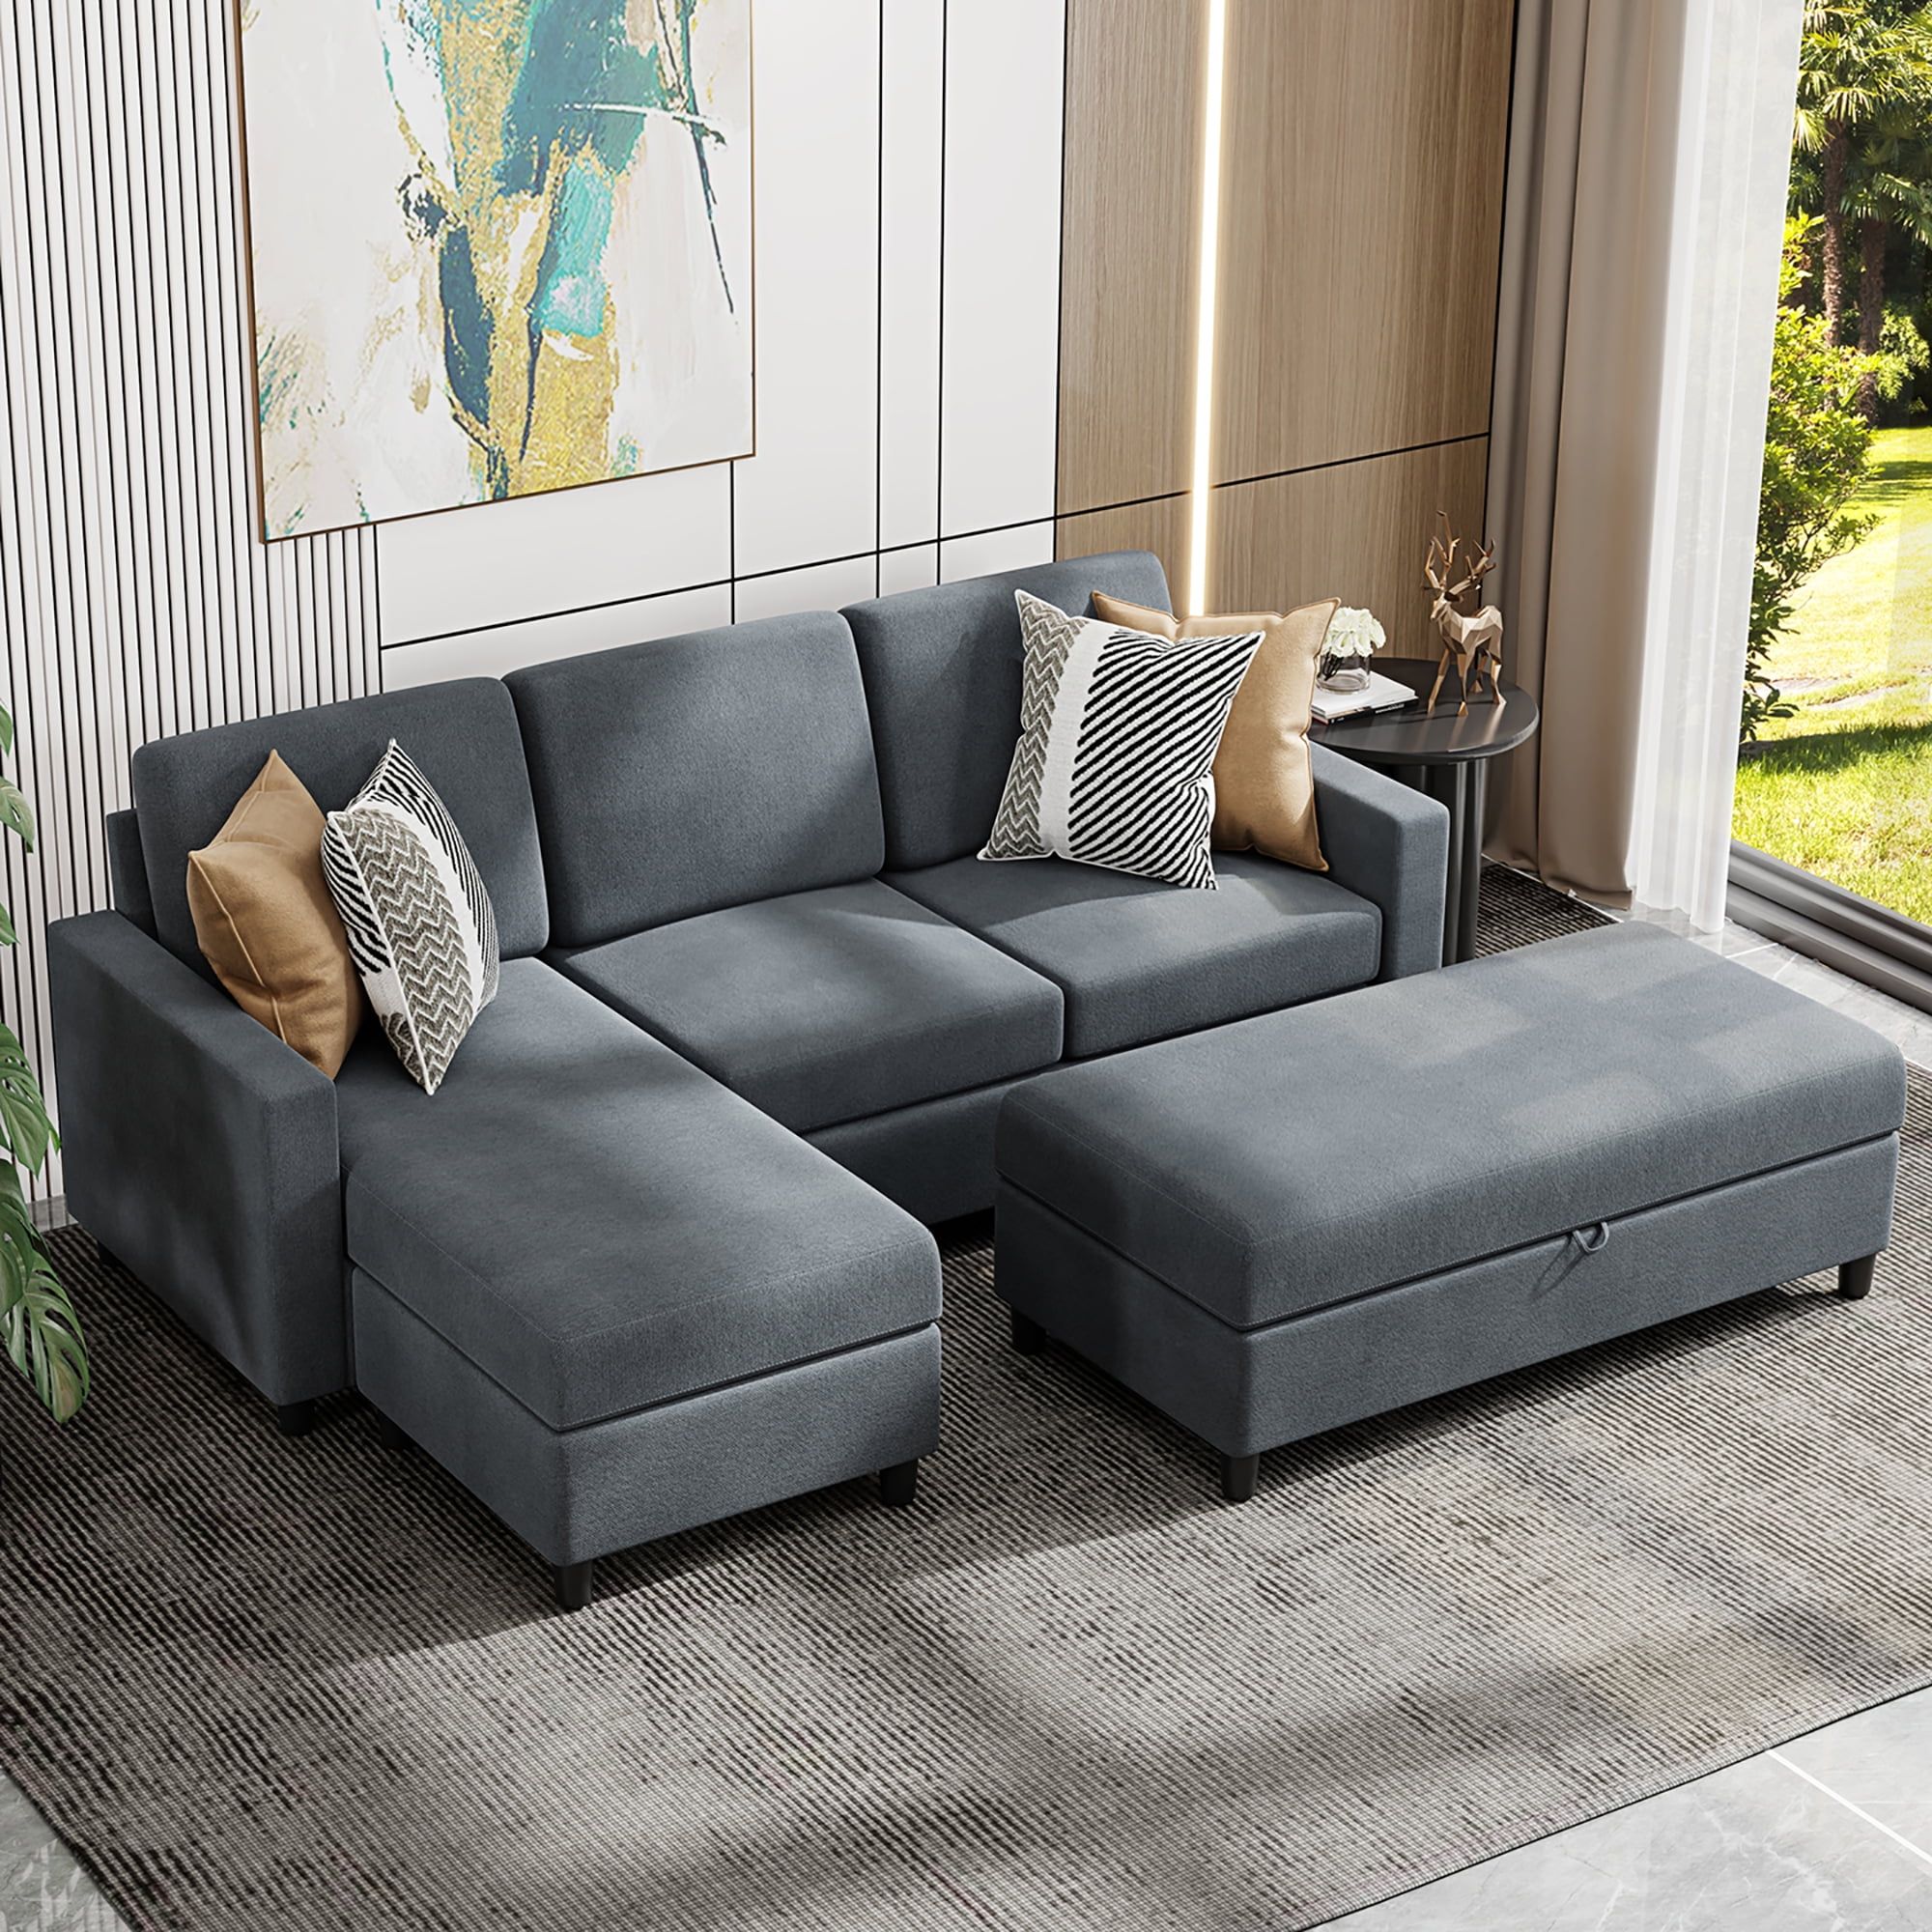 Convertible Sectional Sofa Couch With Storage Ottoman, L Shaped Wide Reversible  Chaise With Linen Fabric(charcoal Grey) – Walmart Intended For L Shape Couches With Reversible Chaises (Photo 1 of 15)